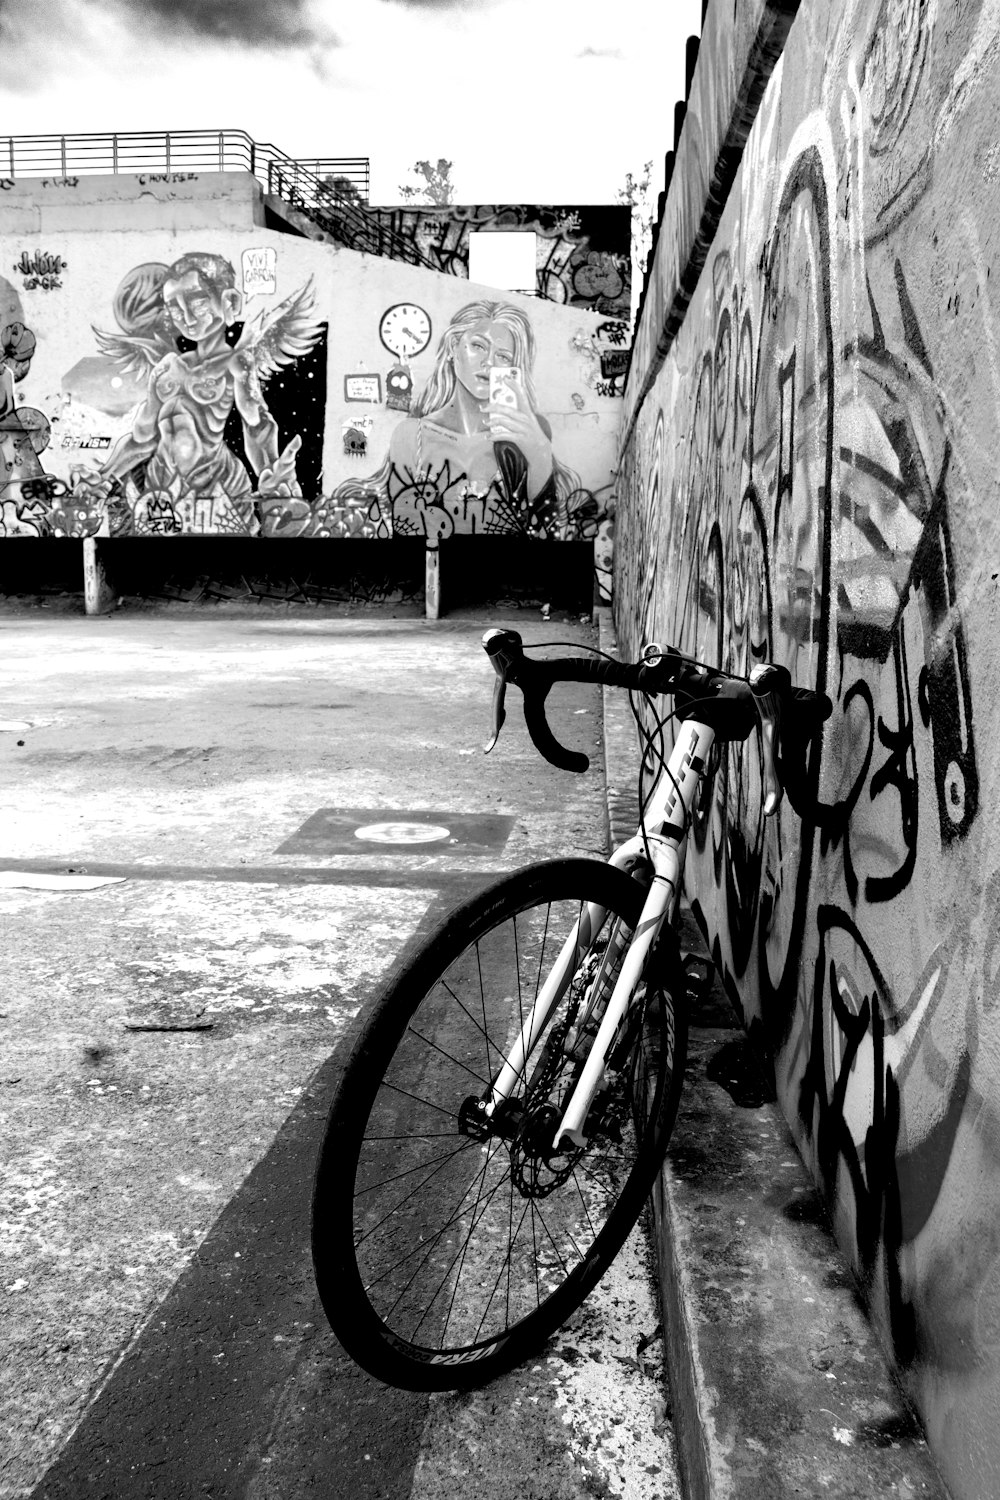 a bike leaning against a wall with graffiti on it